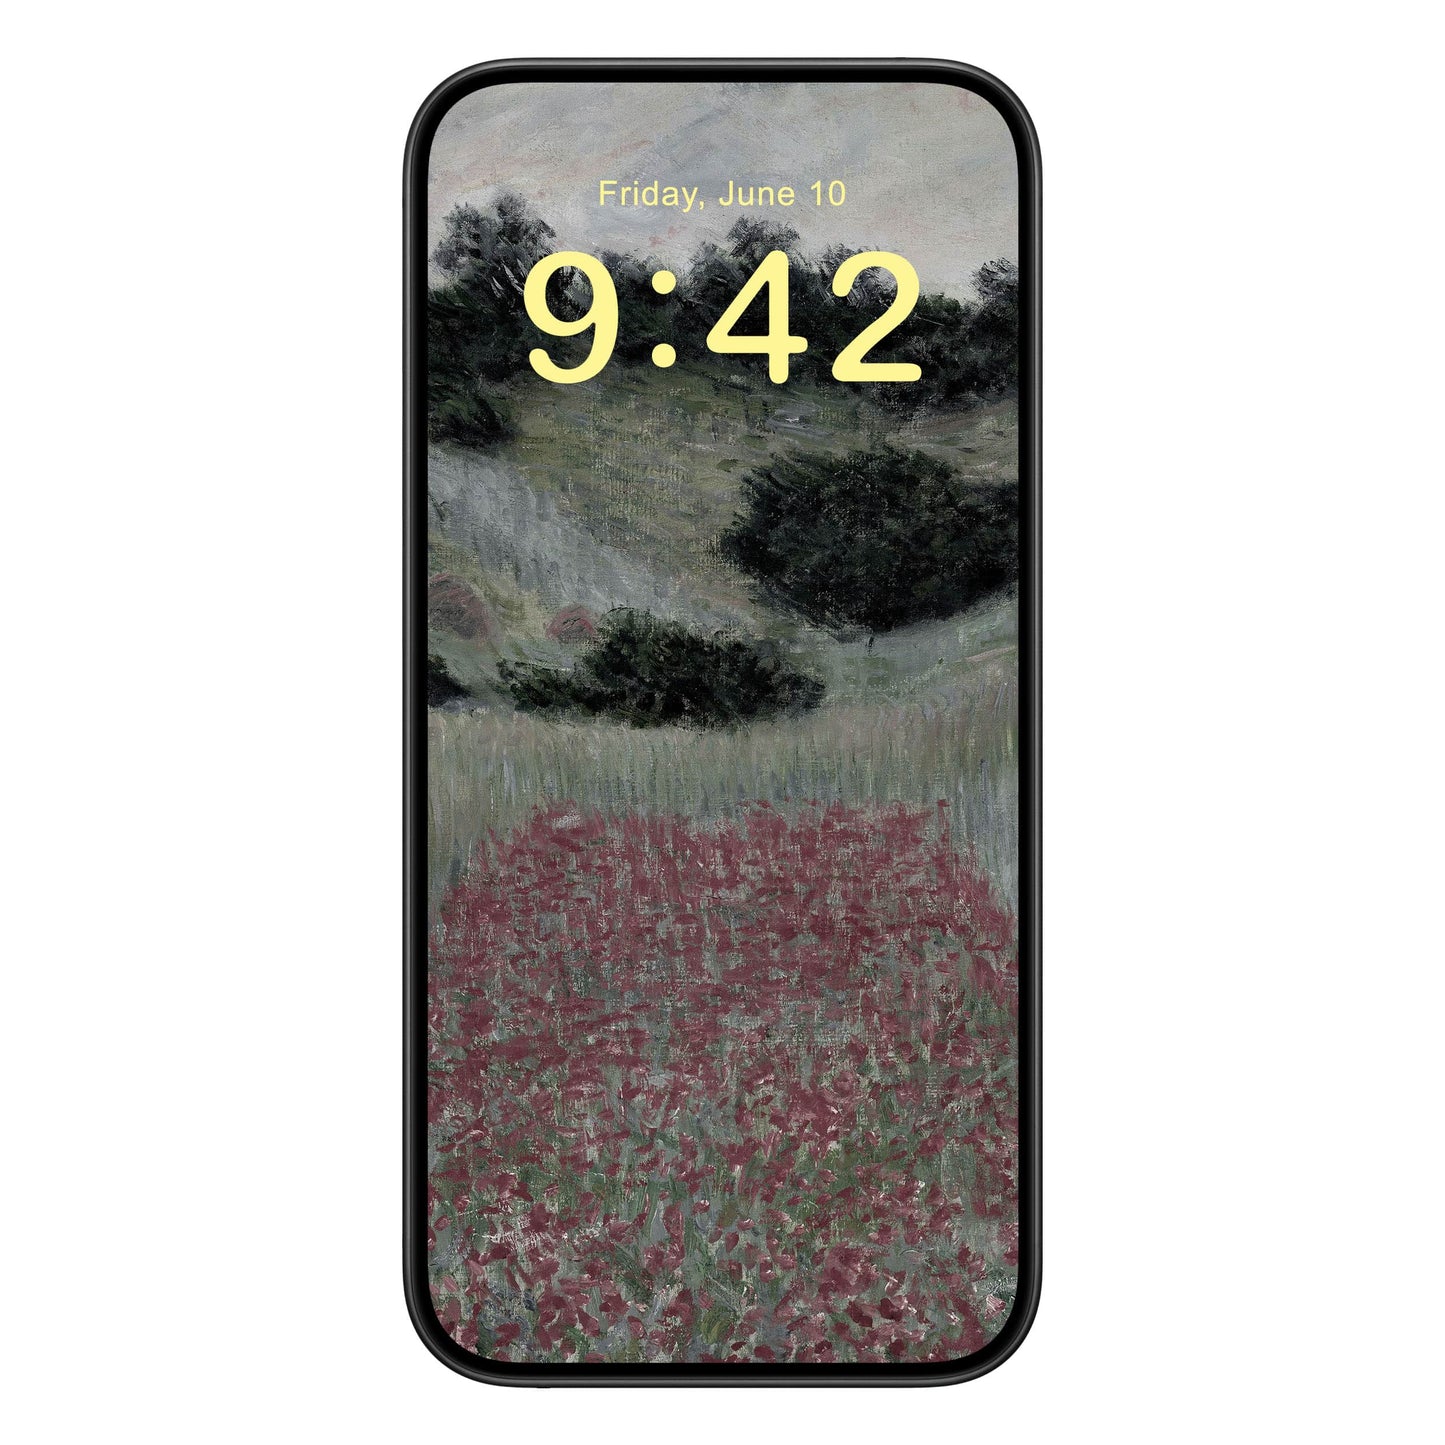 Muted Floral Landscape Phone Wallpaper Yellow Text